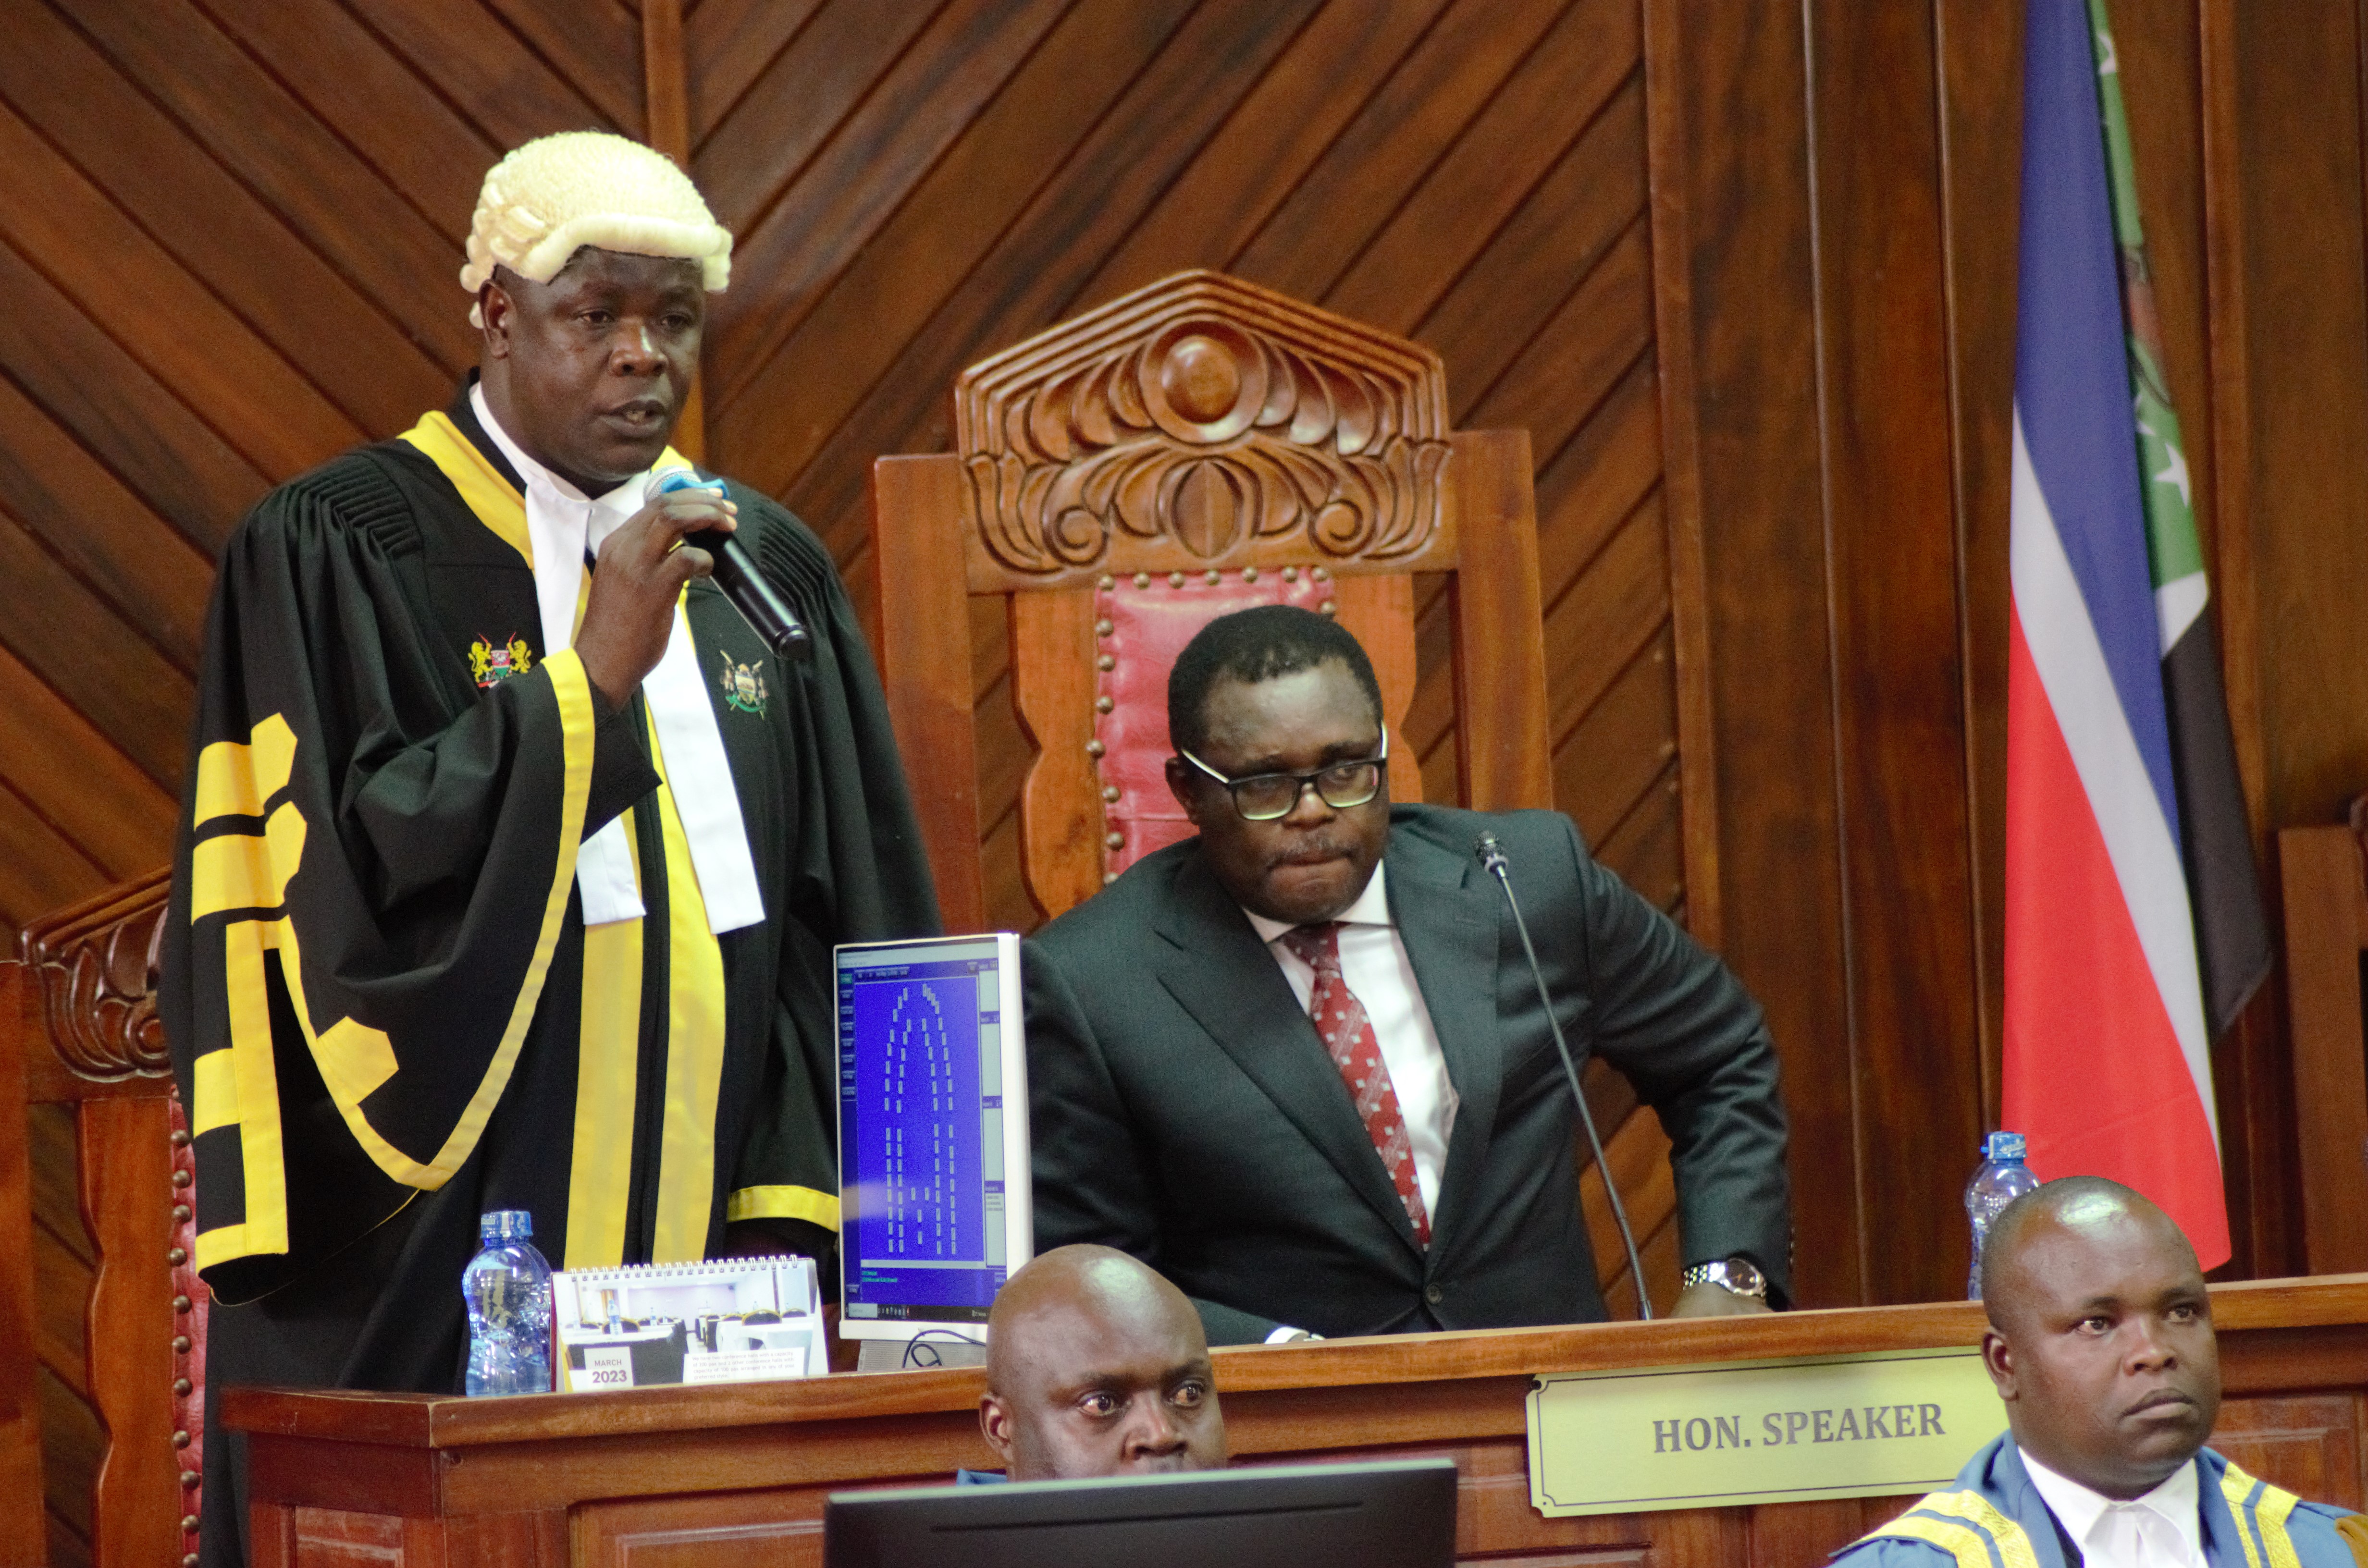 Hon. Speaker Emmanuel Situma reads the convocation ahead of the State of the County Address by H.E. Governor Ken Lusaka